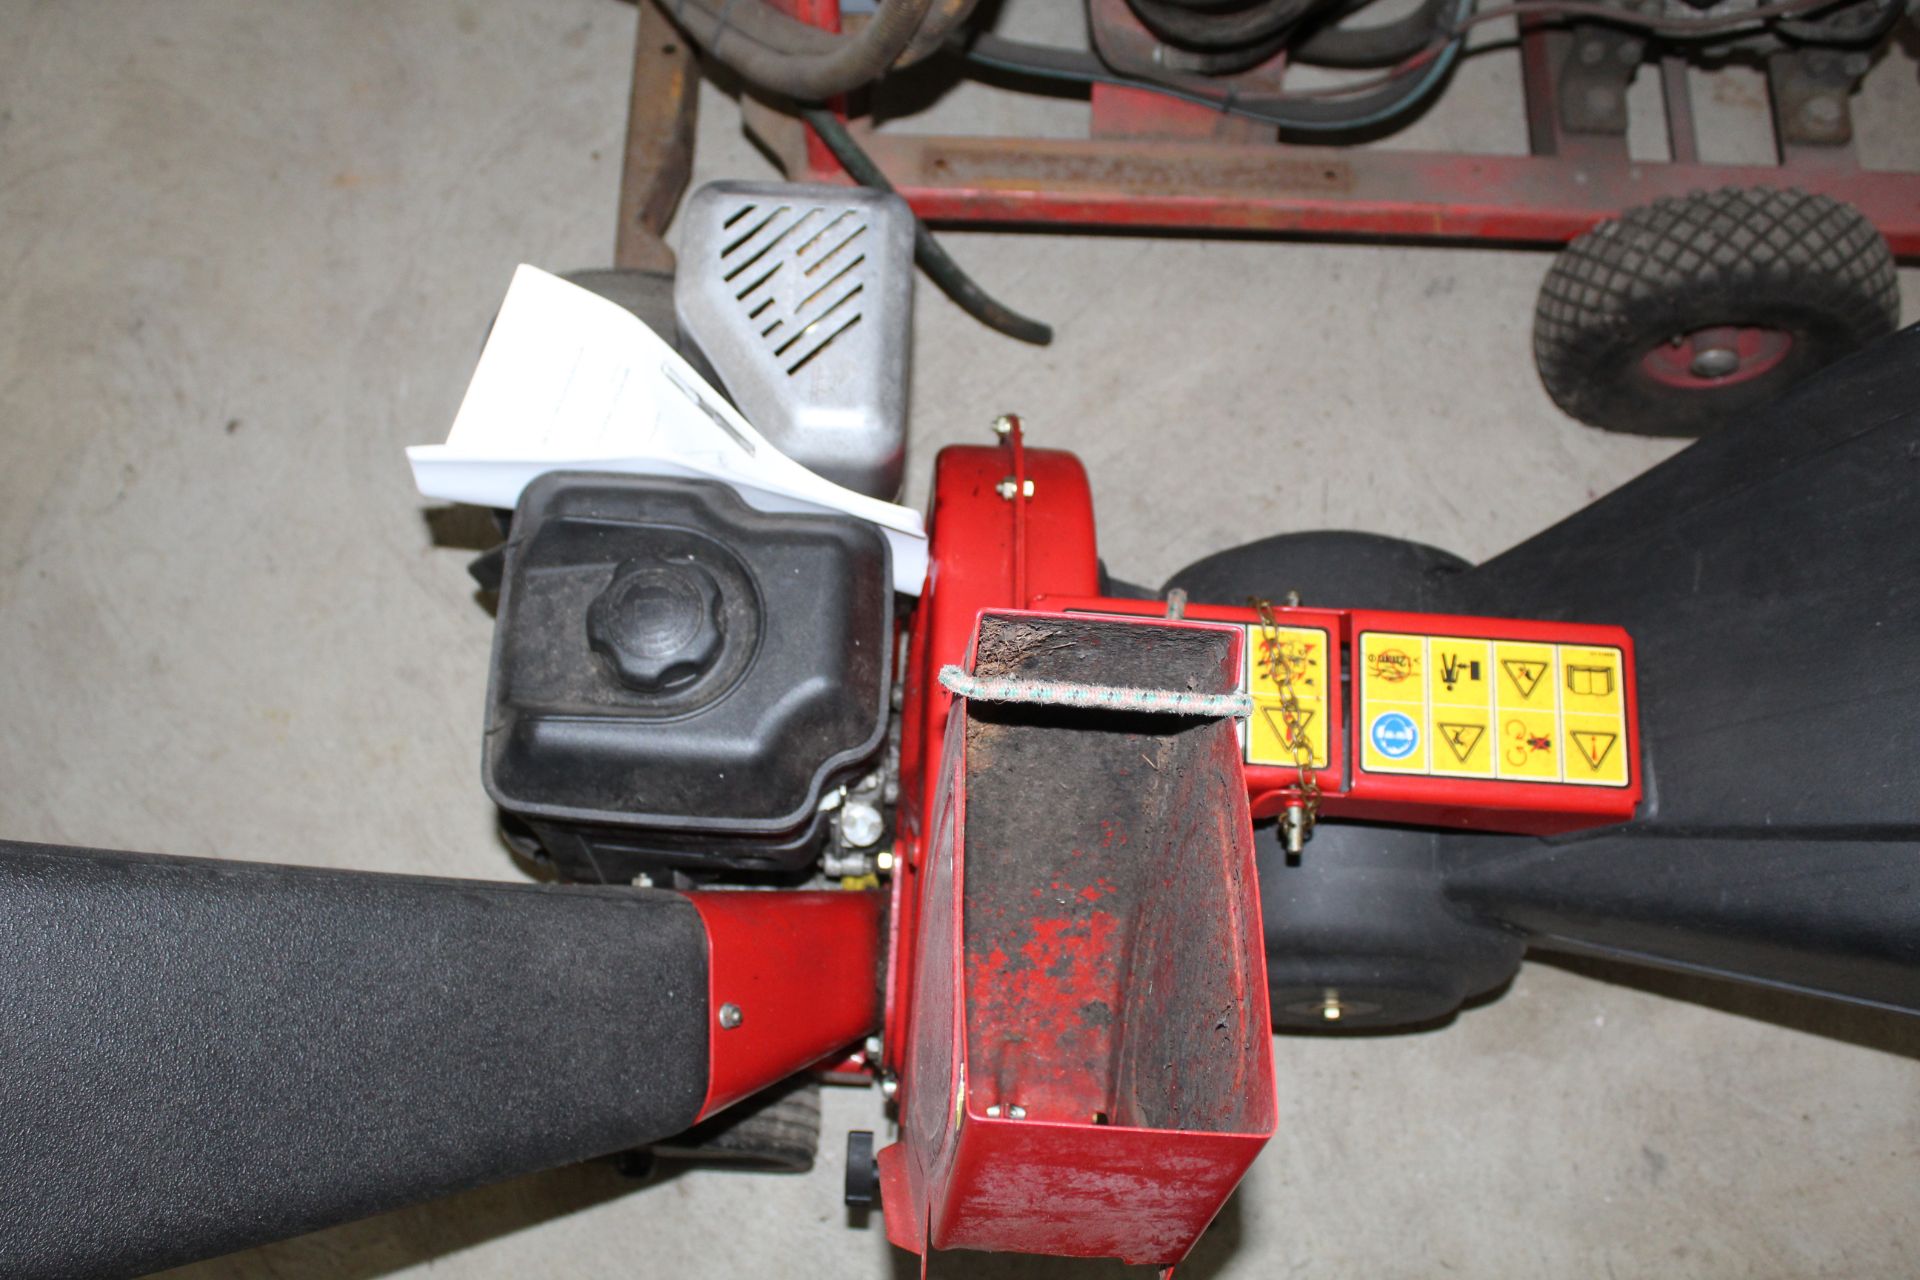 MTD 463/55 Chipper/Shredder with manual. - Image 5 of 7